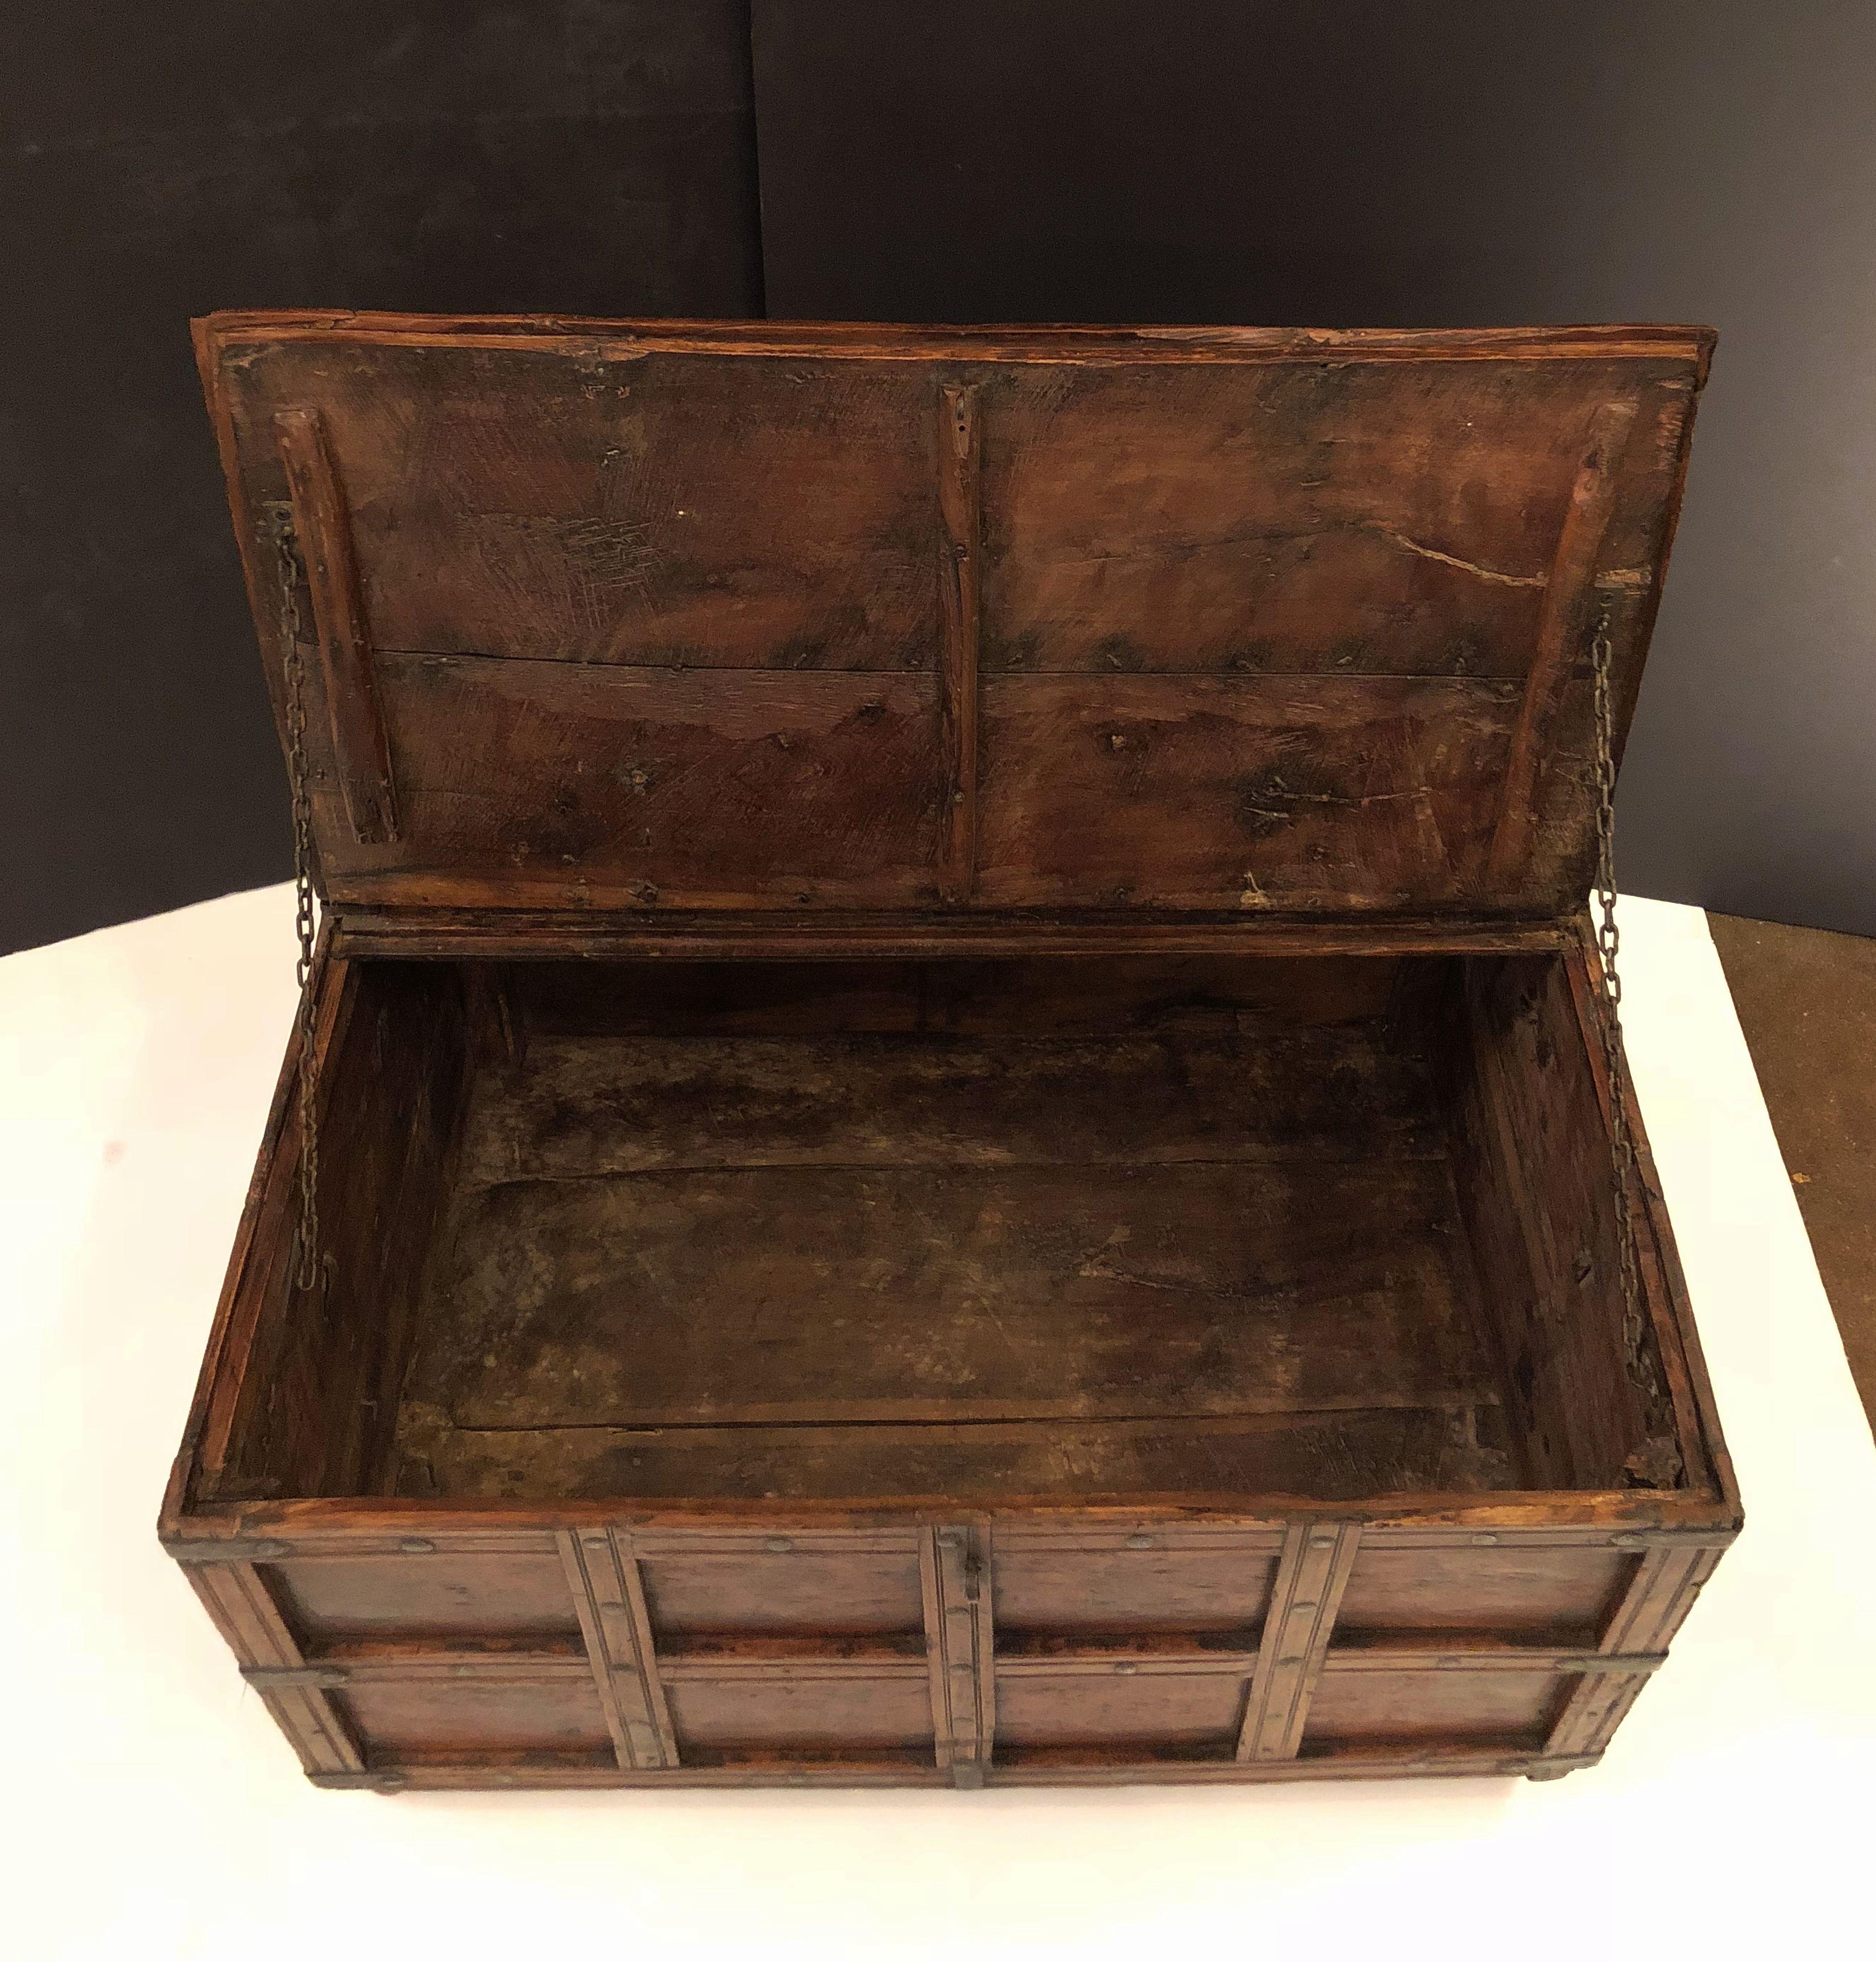 Iron-Bound Stick Box or Trunk from British Colonial India 'The Raj' 2